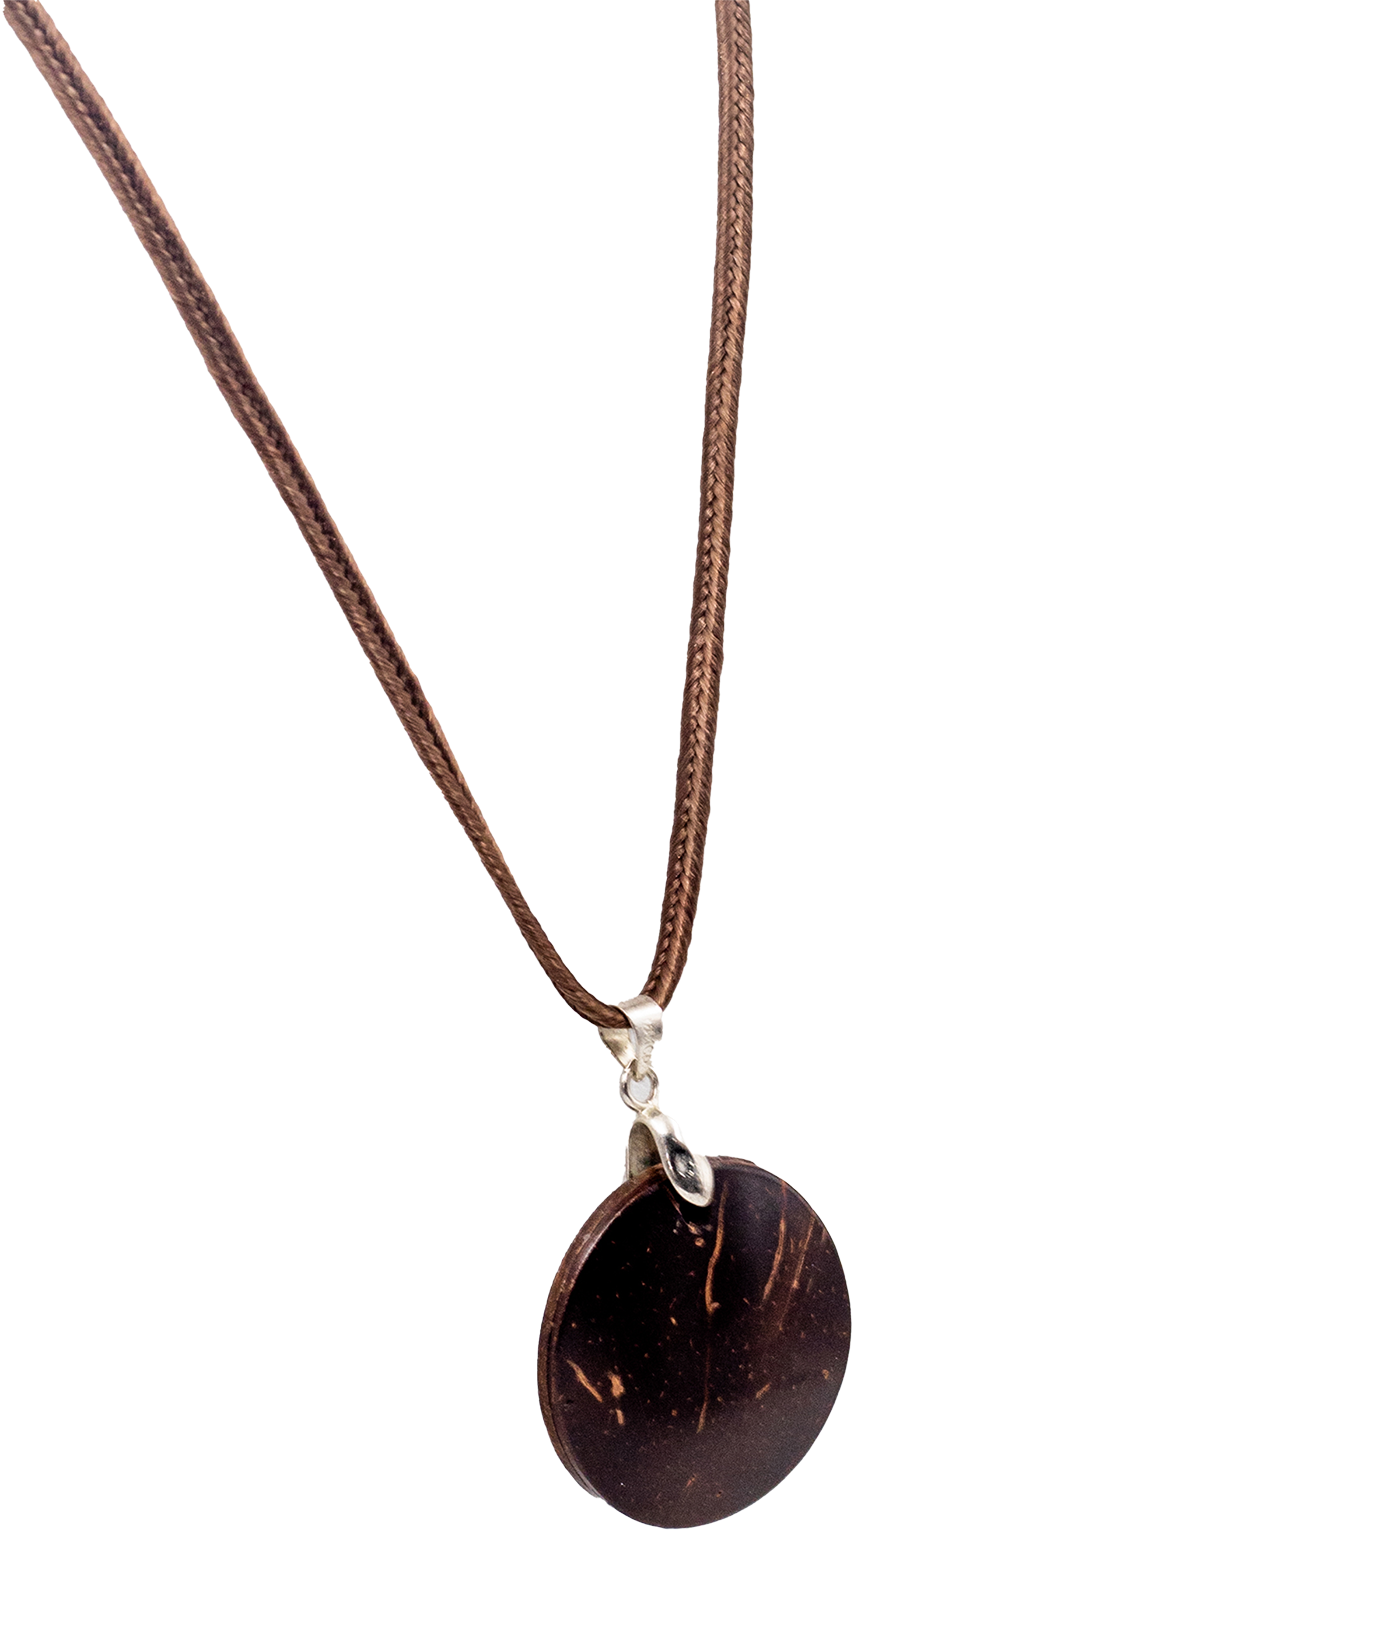 Double – Side necklace